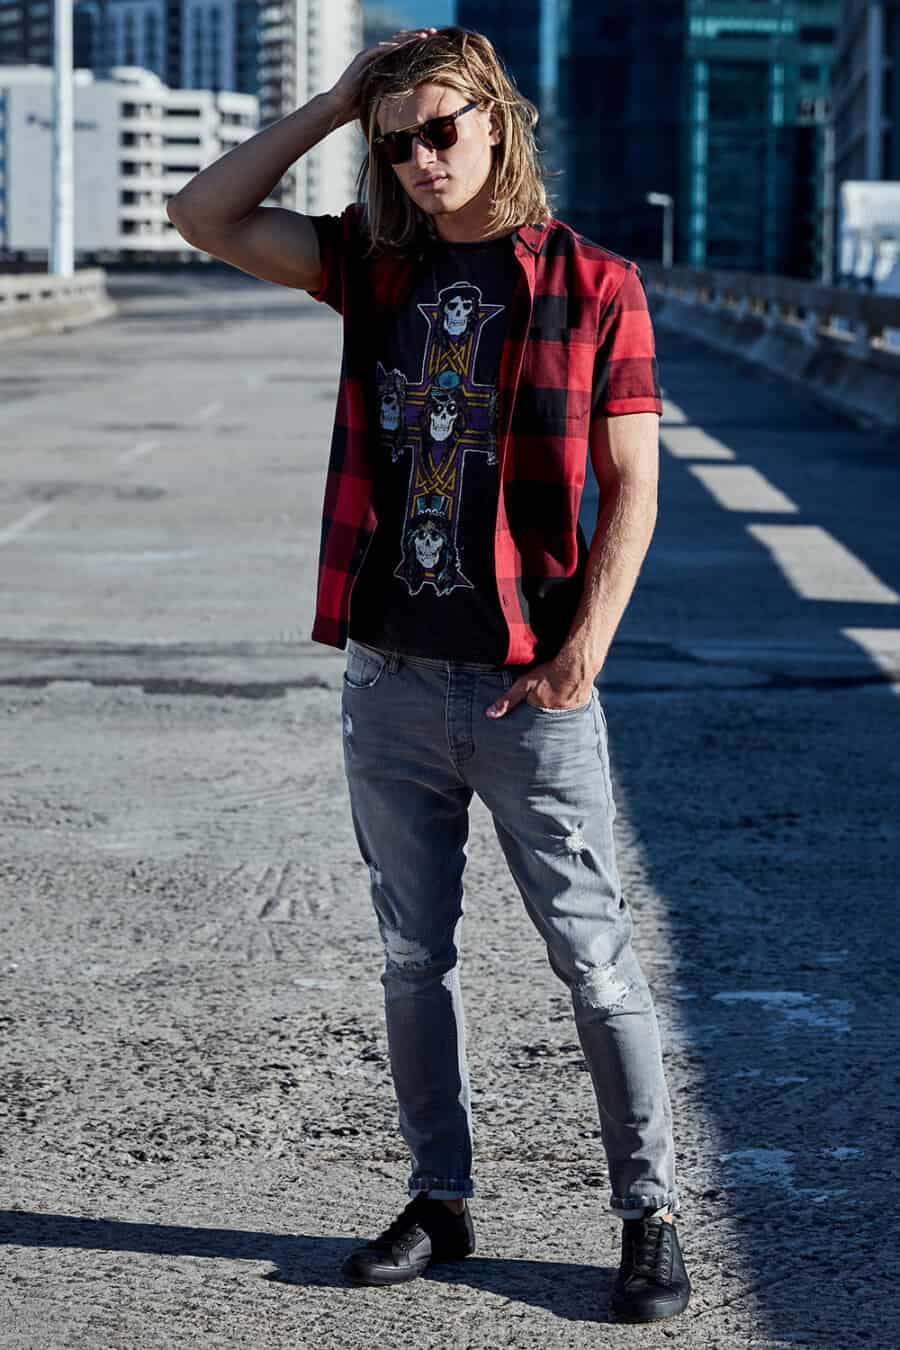 Men's ripped grey jeans, skull print black T-shirt, red/black check short-sleeve shirt left open and black sneakers grunge outfit